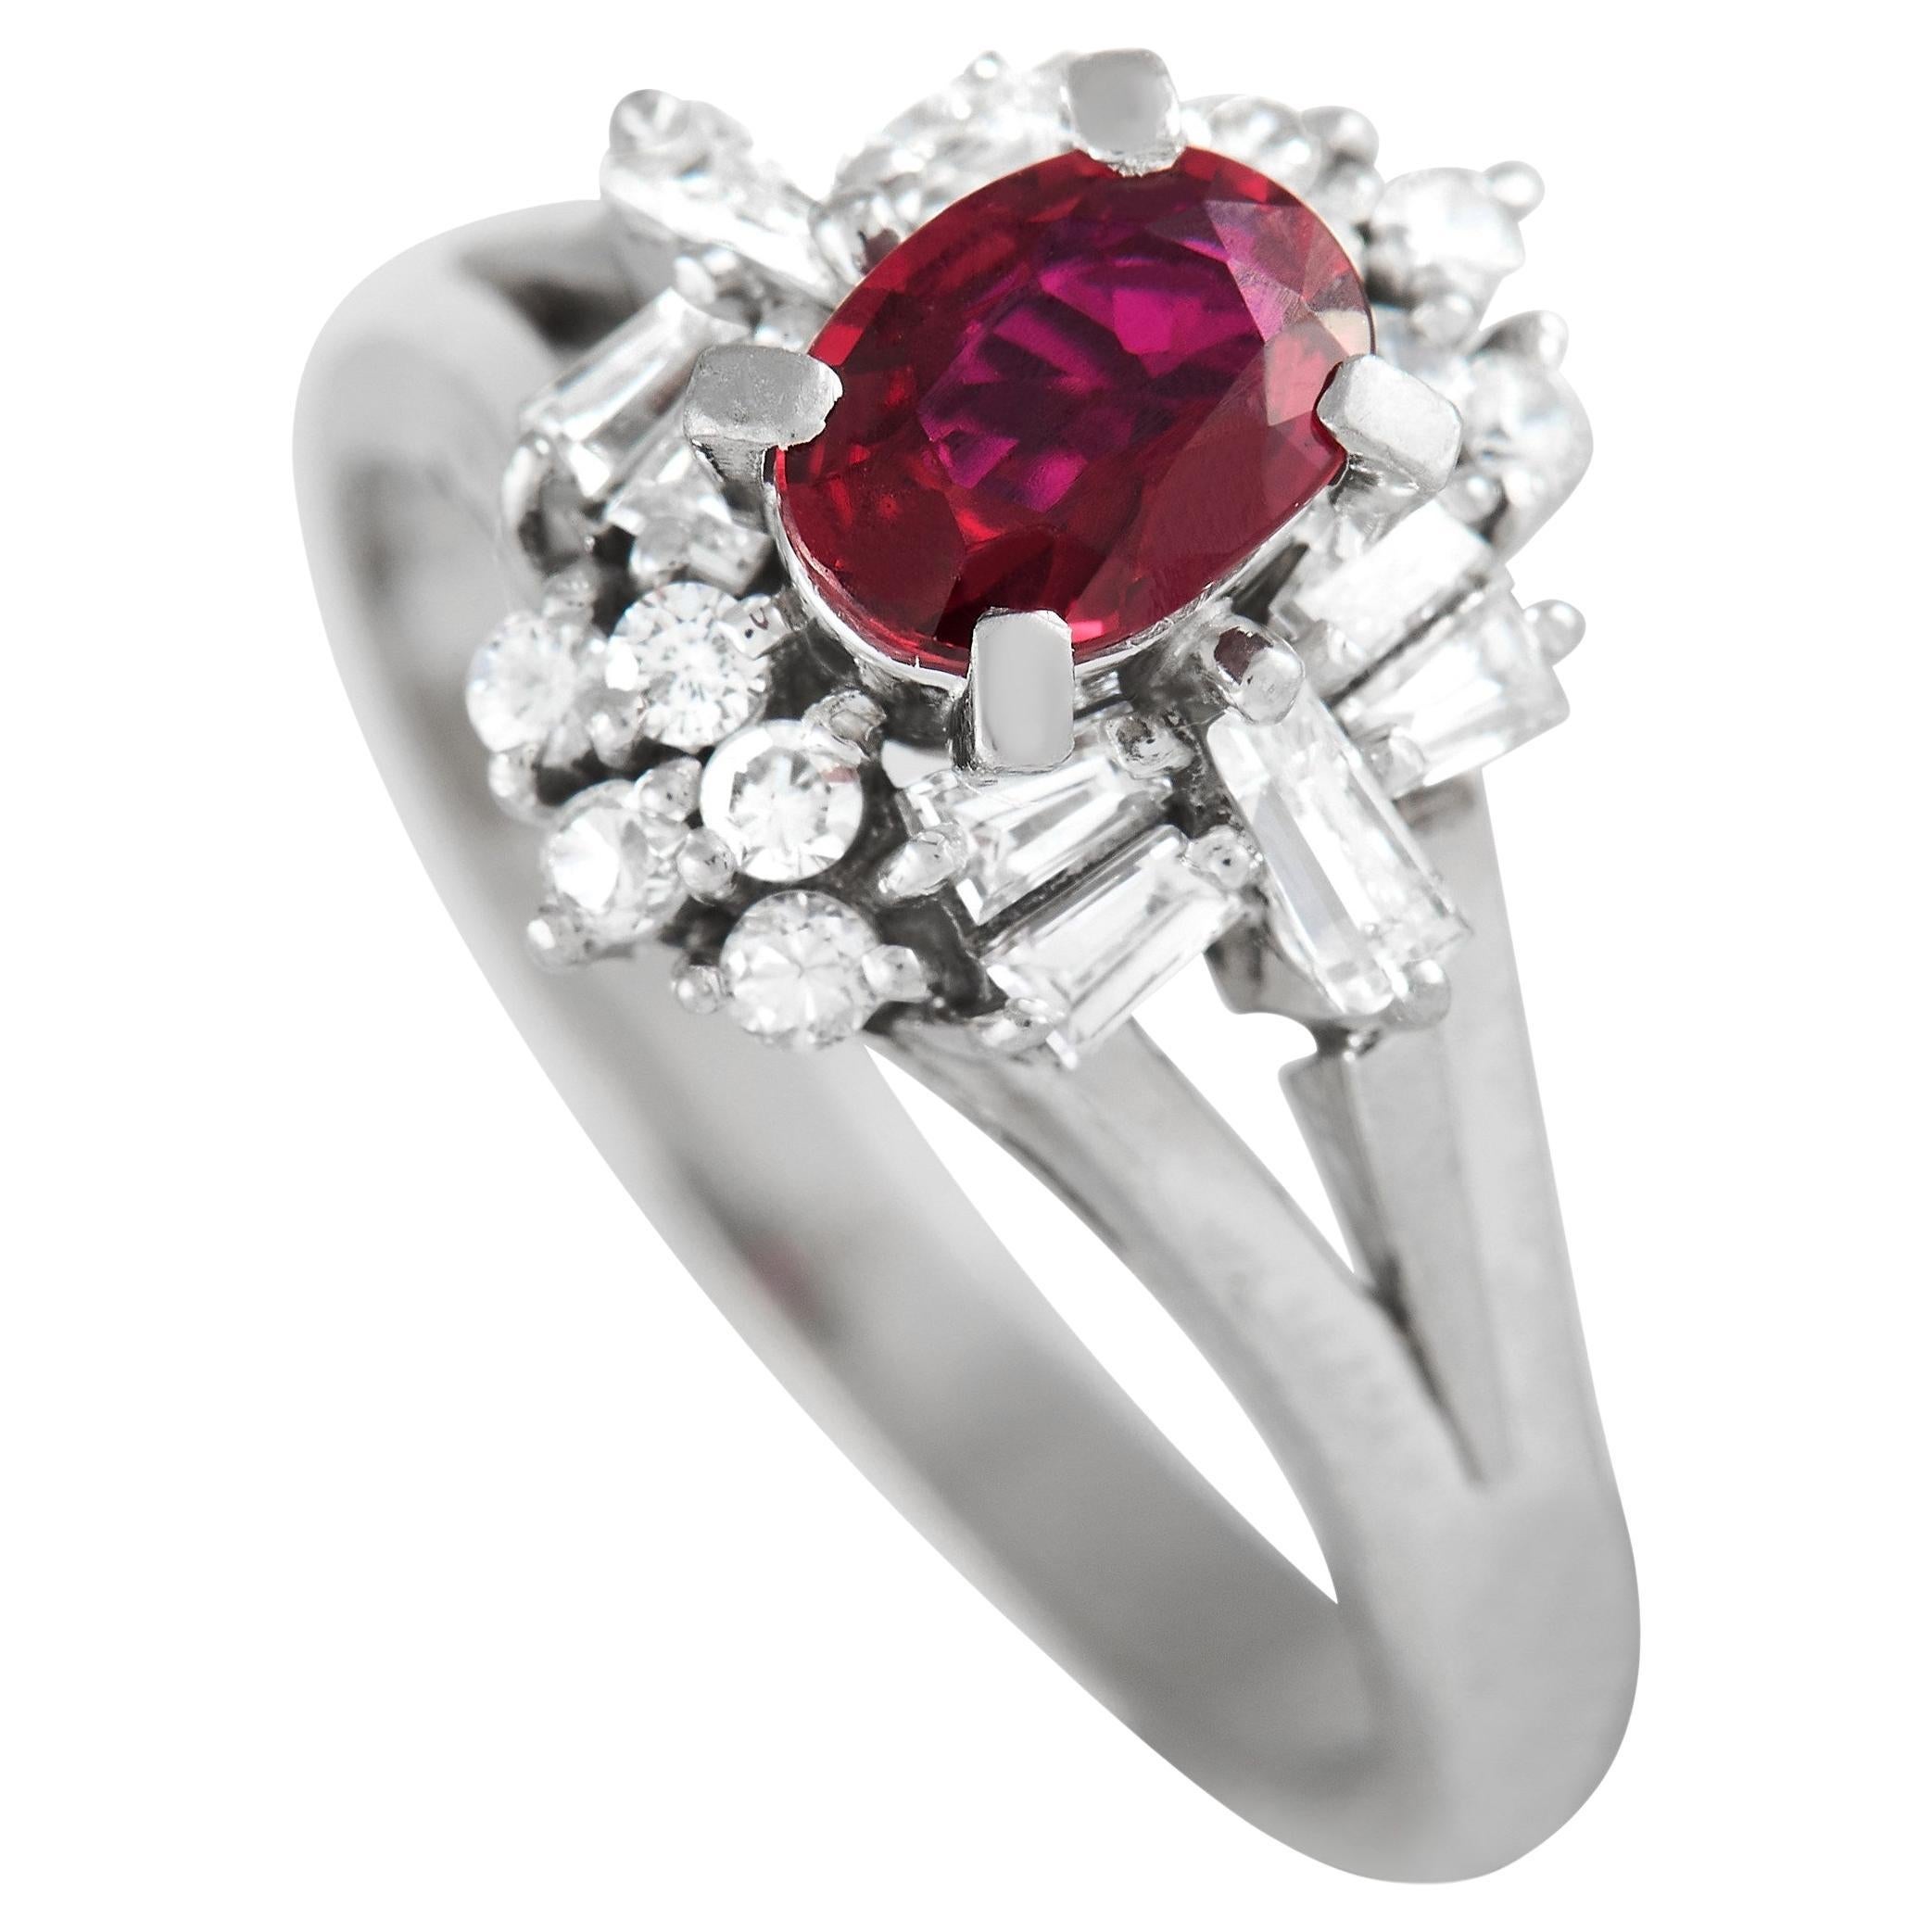 LB Exclusive Platinum 0.56 Ct Diamond and Ruby Ring